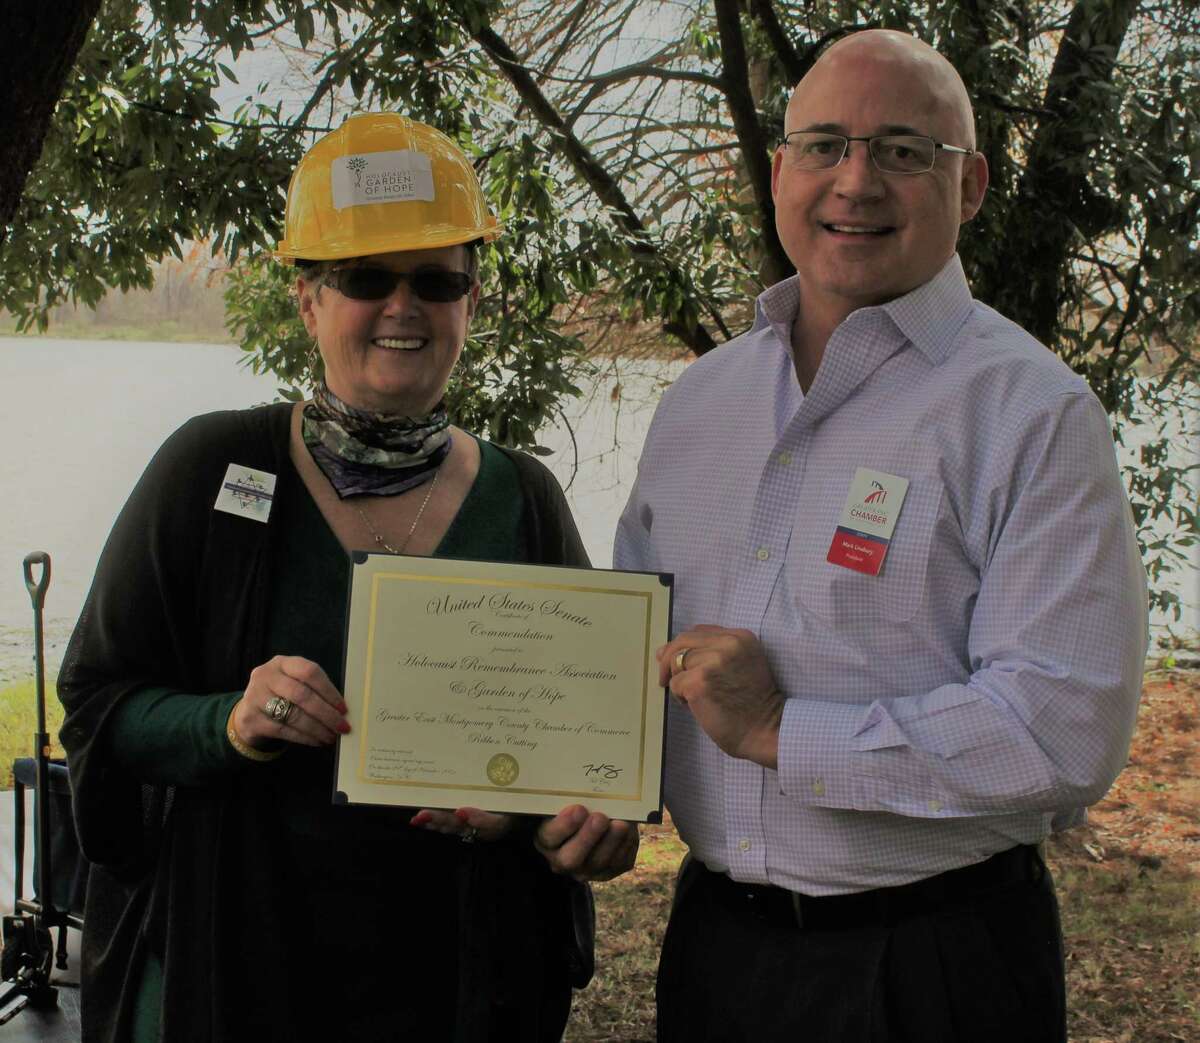 Rozalie Jerome, executive director of the Holocaust Garden of Hope project, and Mark Linabury, president of the Greater East Montgomery County Chamber of Commerce, display a proclamation from U.S. Senator Ted Cruz in honor of the ribbon-cutting for the garden project.